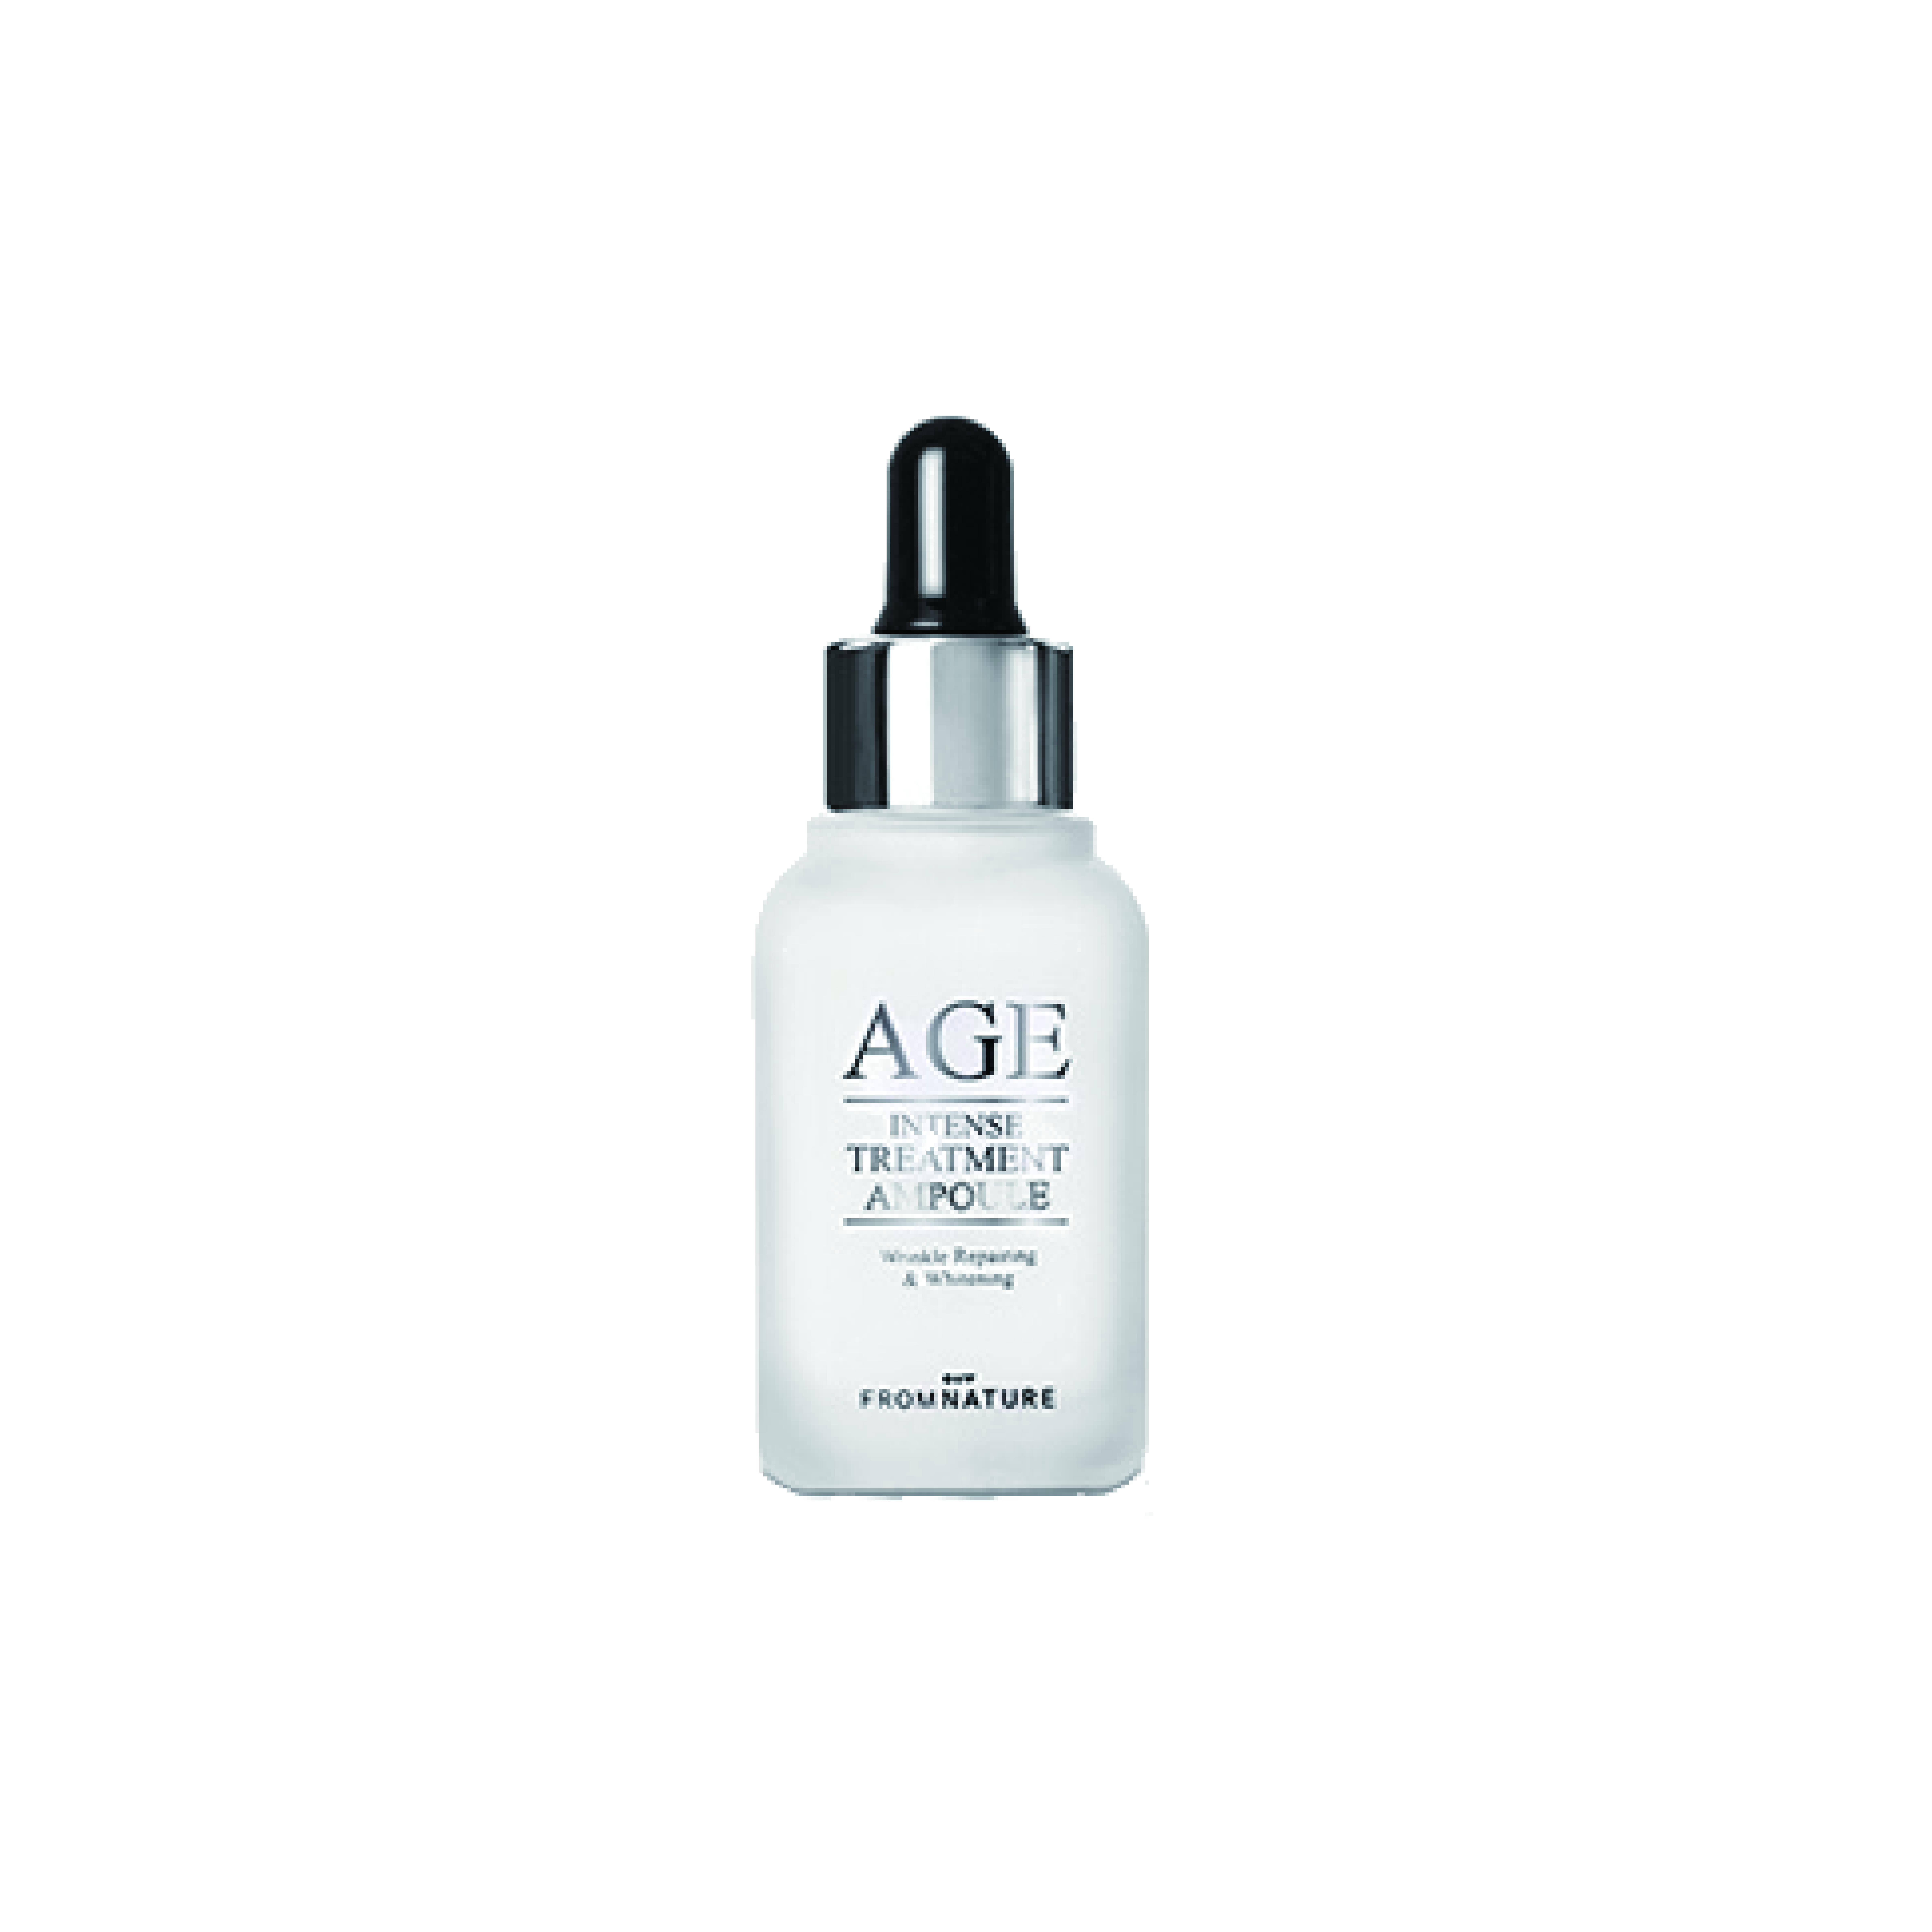 FROM NATURE - AGE TREATMENT AMPOULE